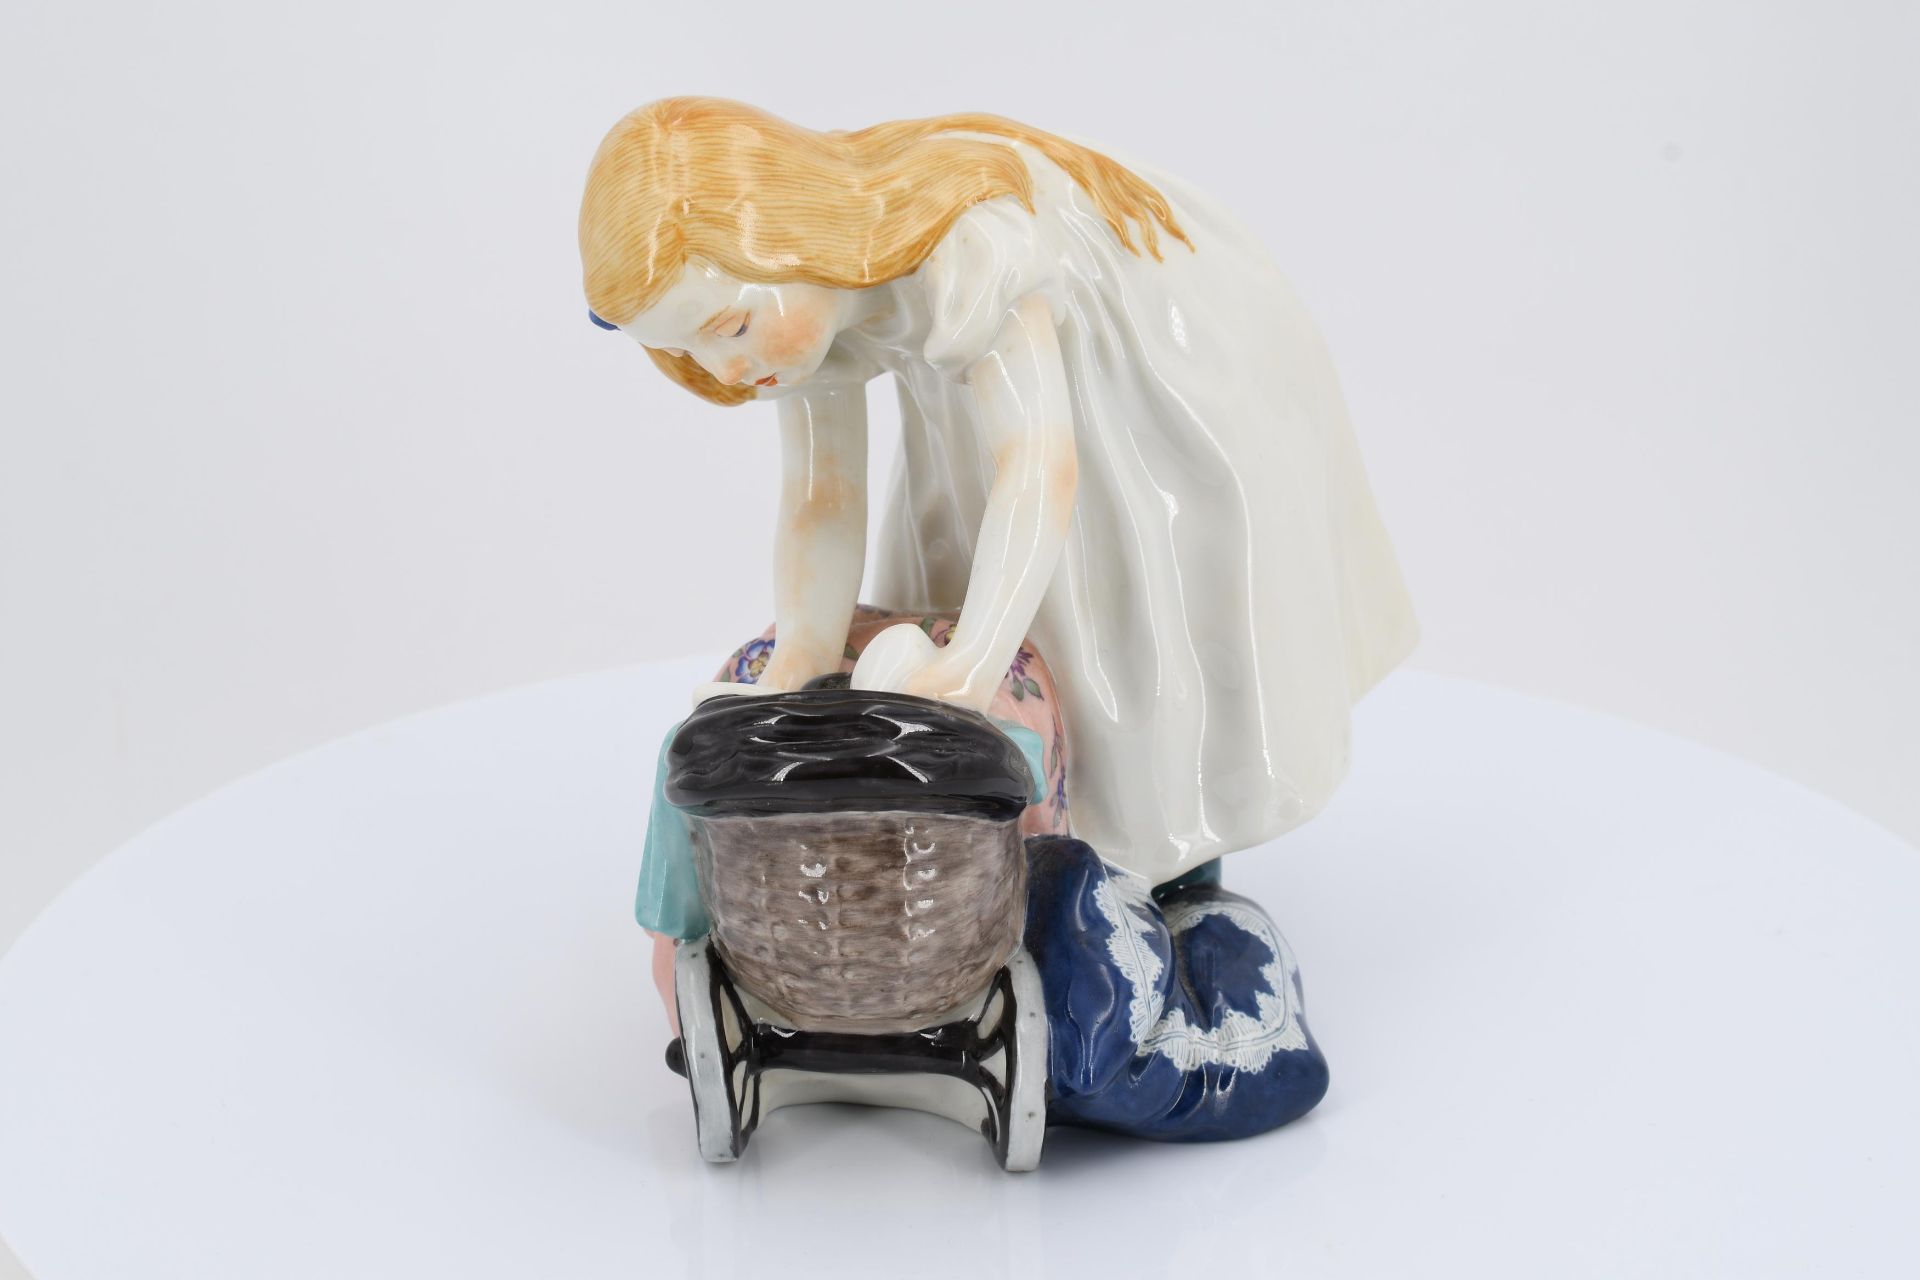 Porcelain figurine of girl with a doll's pram - Image 2 of 6